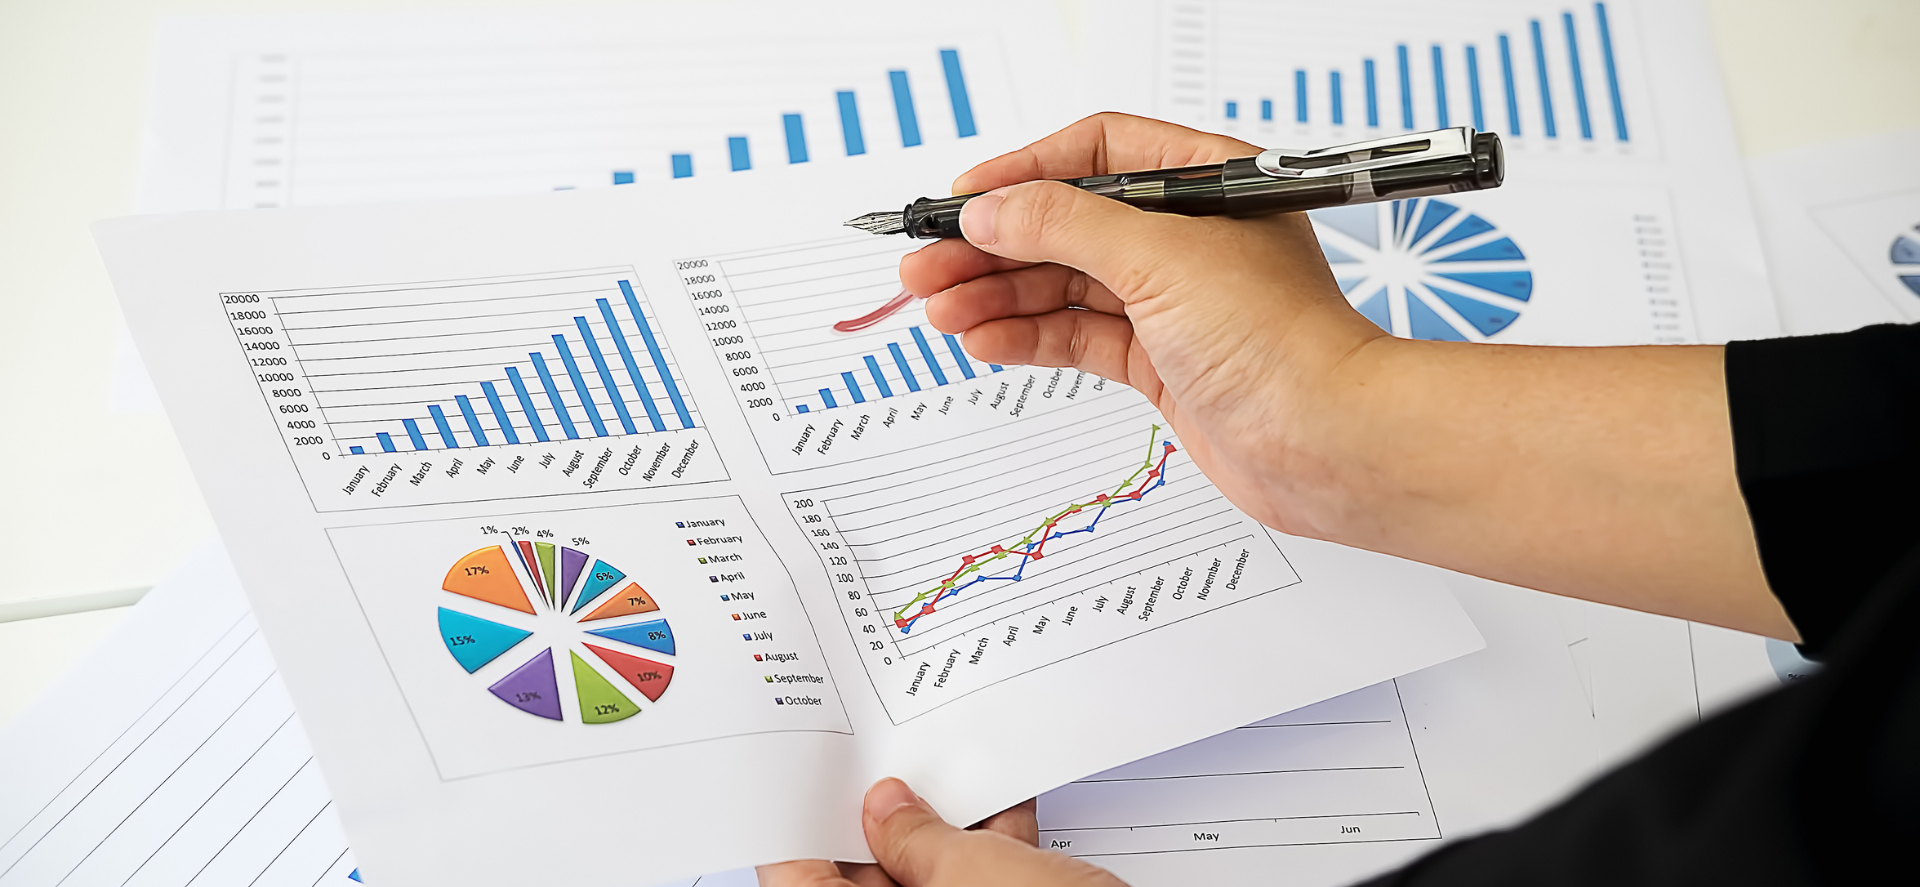 5 reasons to use data analysis to shake up your charity marketing strategy